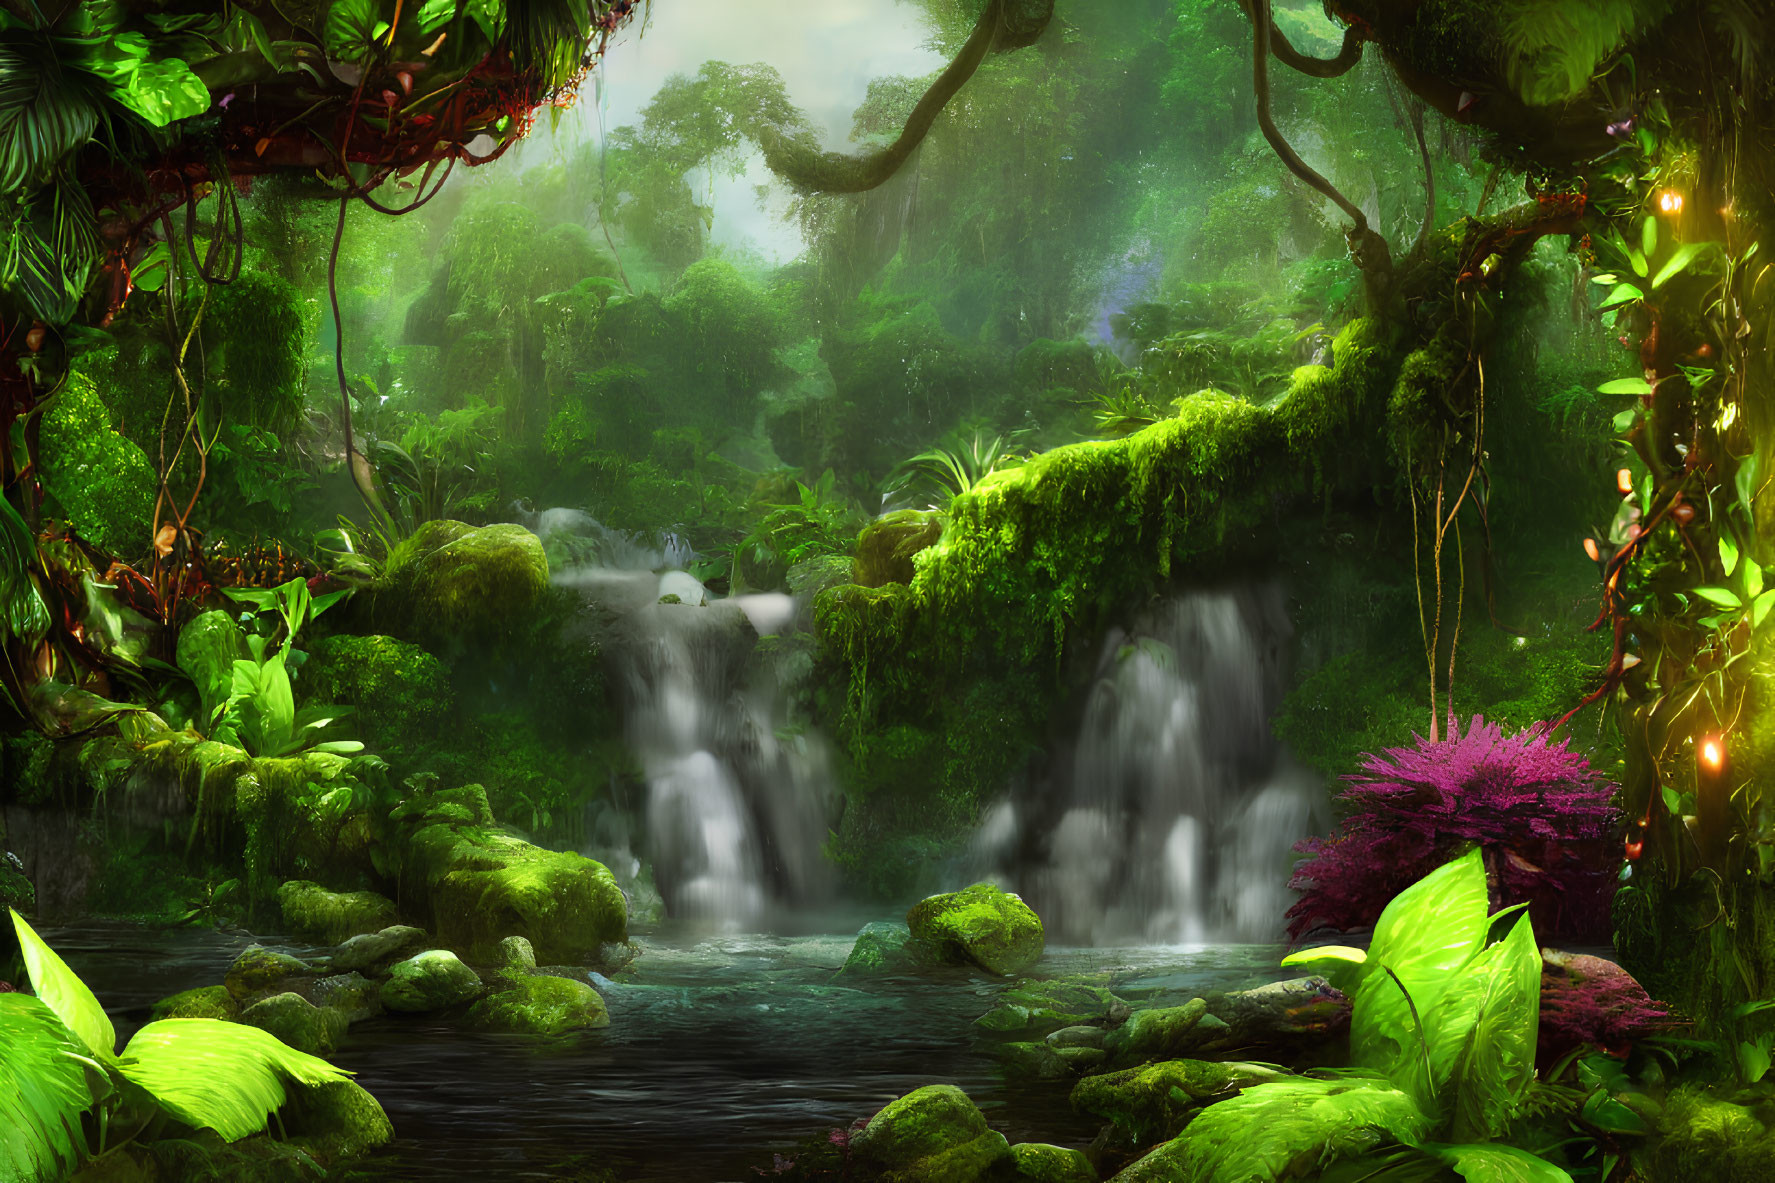 Vibrant green forest with waterfalls, mossy rocks, and serene river